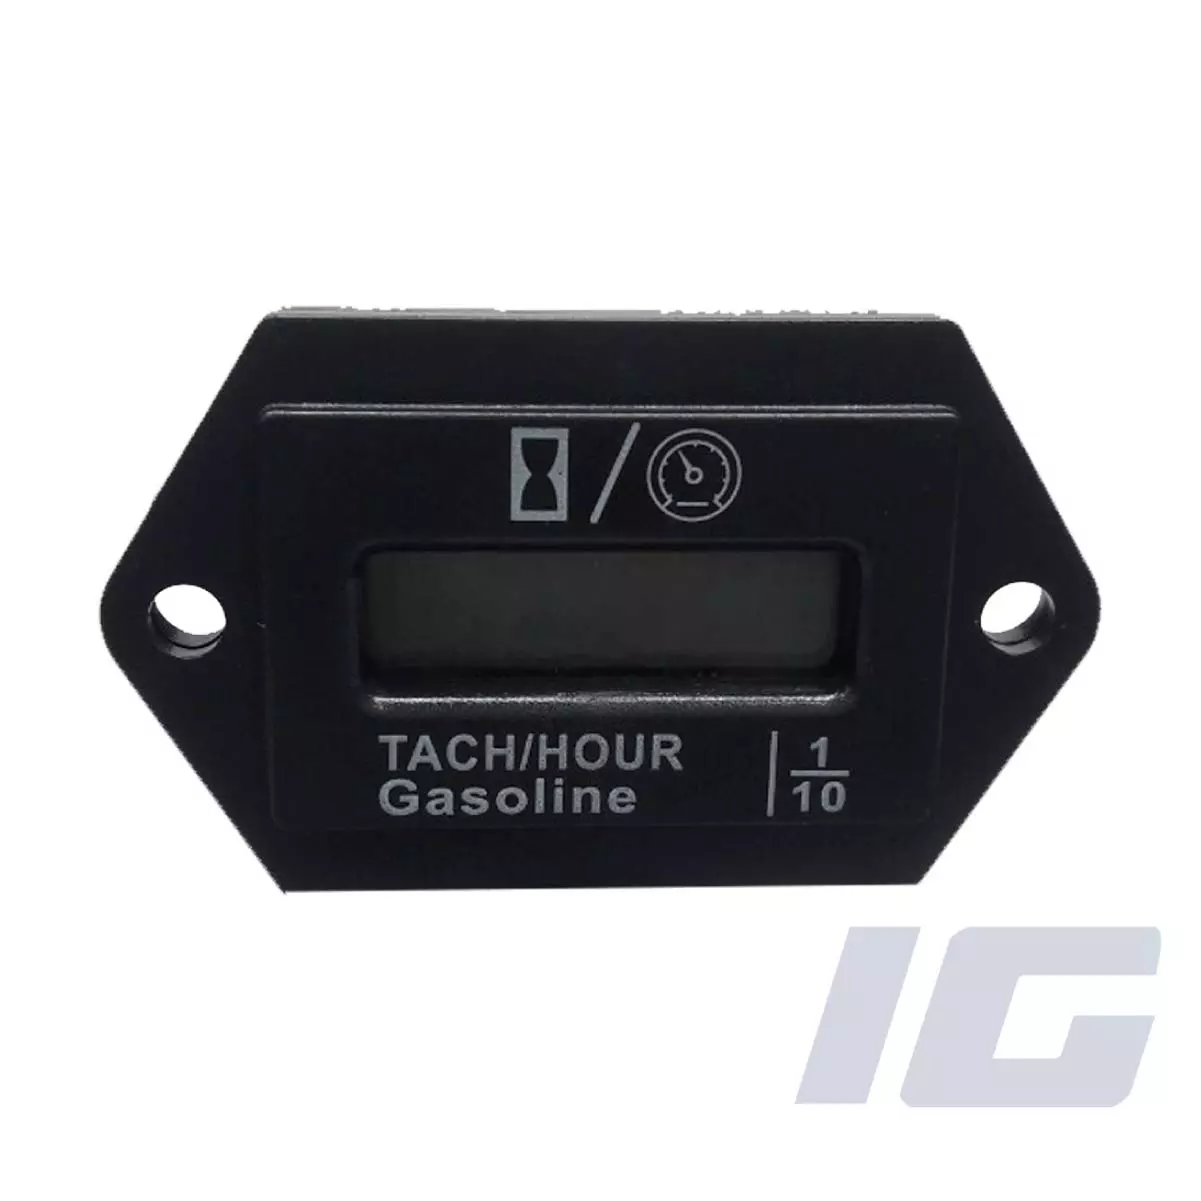 Inductive Tach / Hour Meter Rectangle Type for Generator, Genset, Small Engine Meter Gauges for generator, genset, small engine, lawn mower, generating set, diesel. industrial automation with sensor